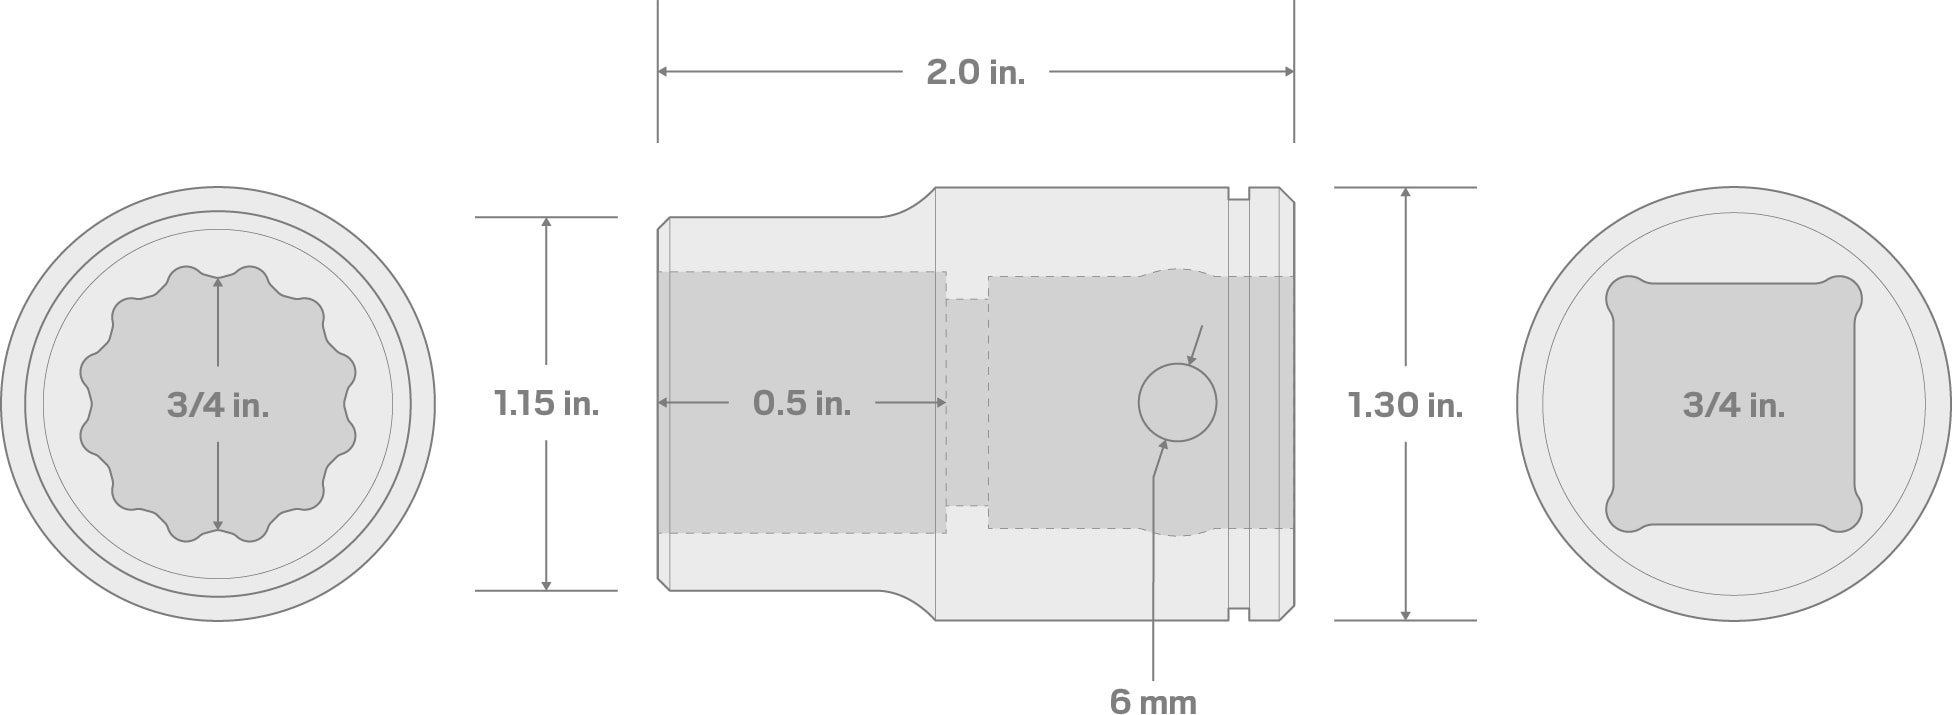 Specs for 3/4 Inch Drive x 3/4 Inch 12-Point Socket